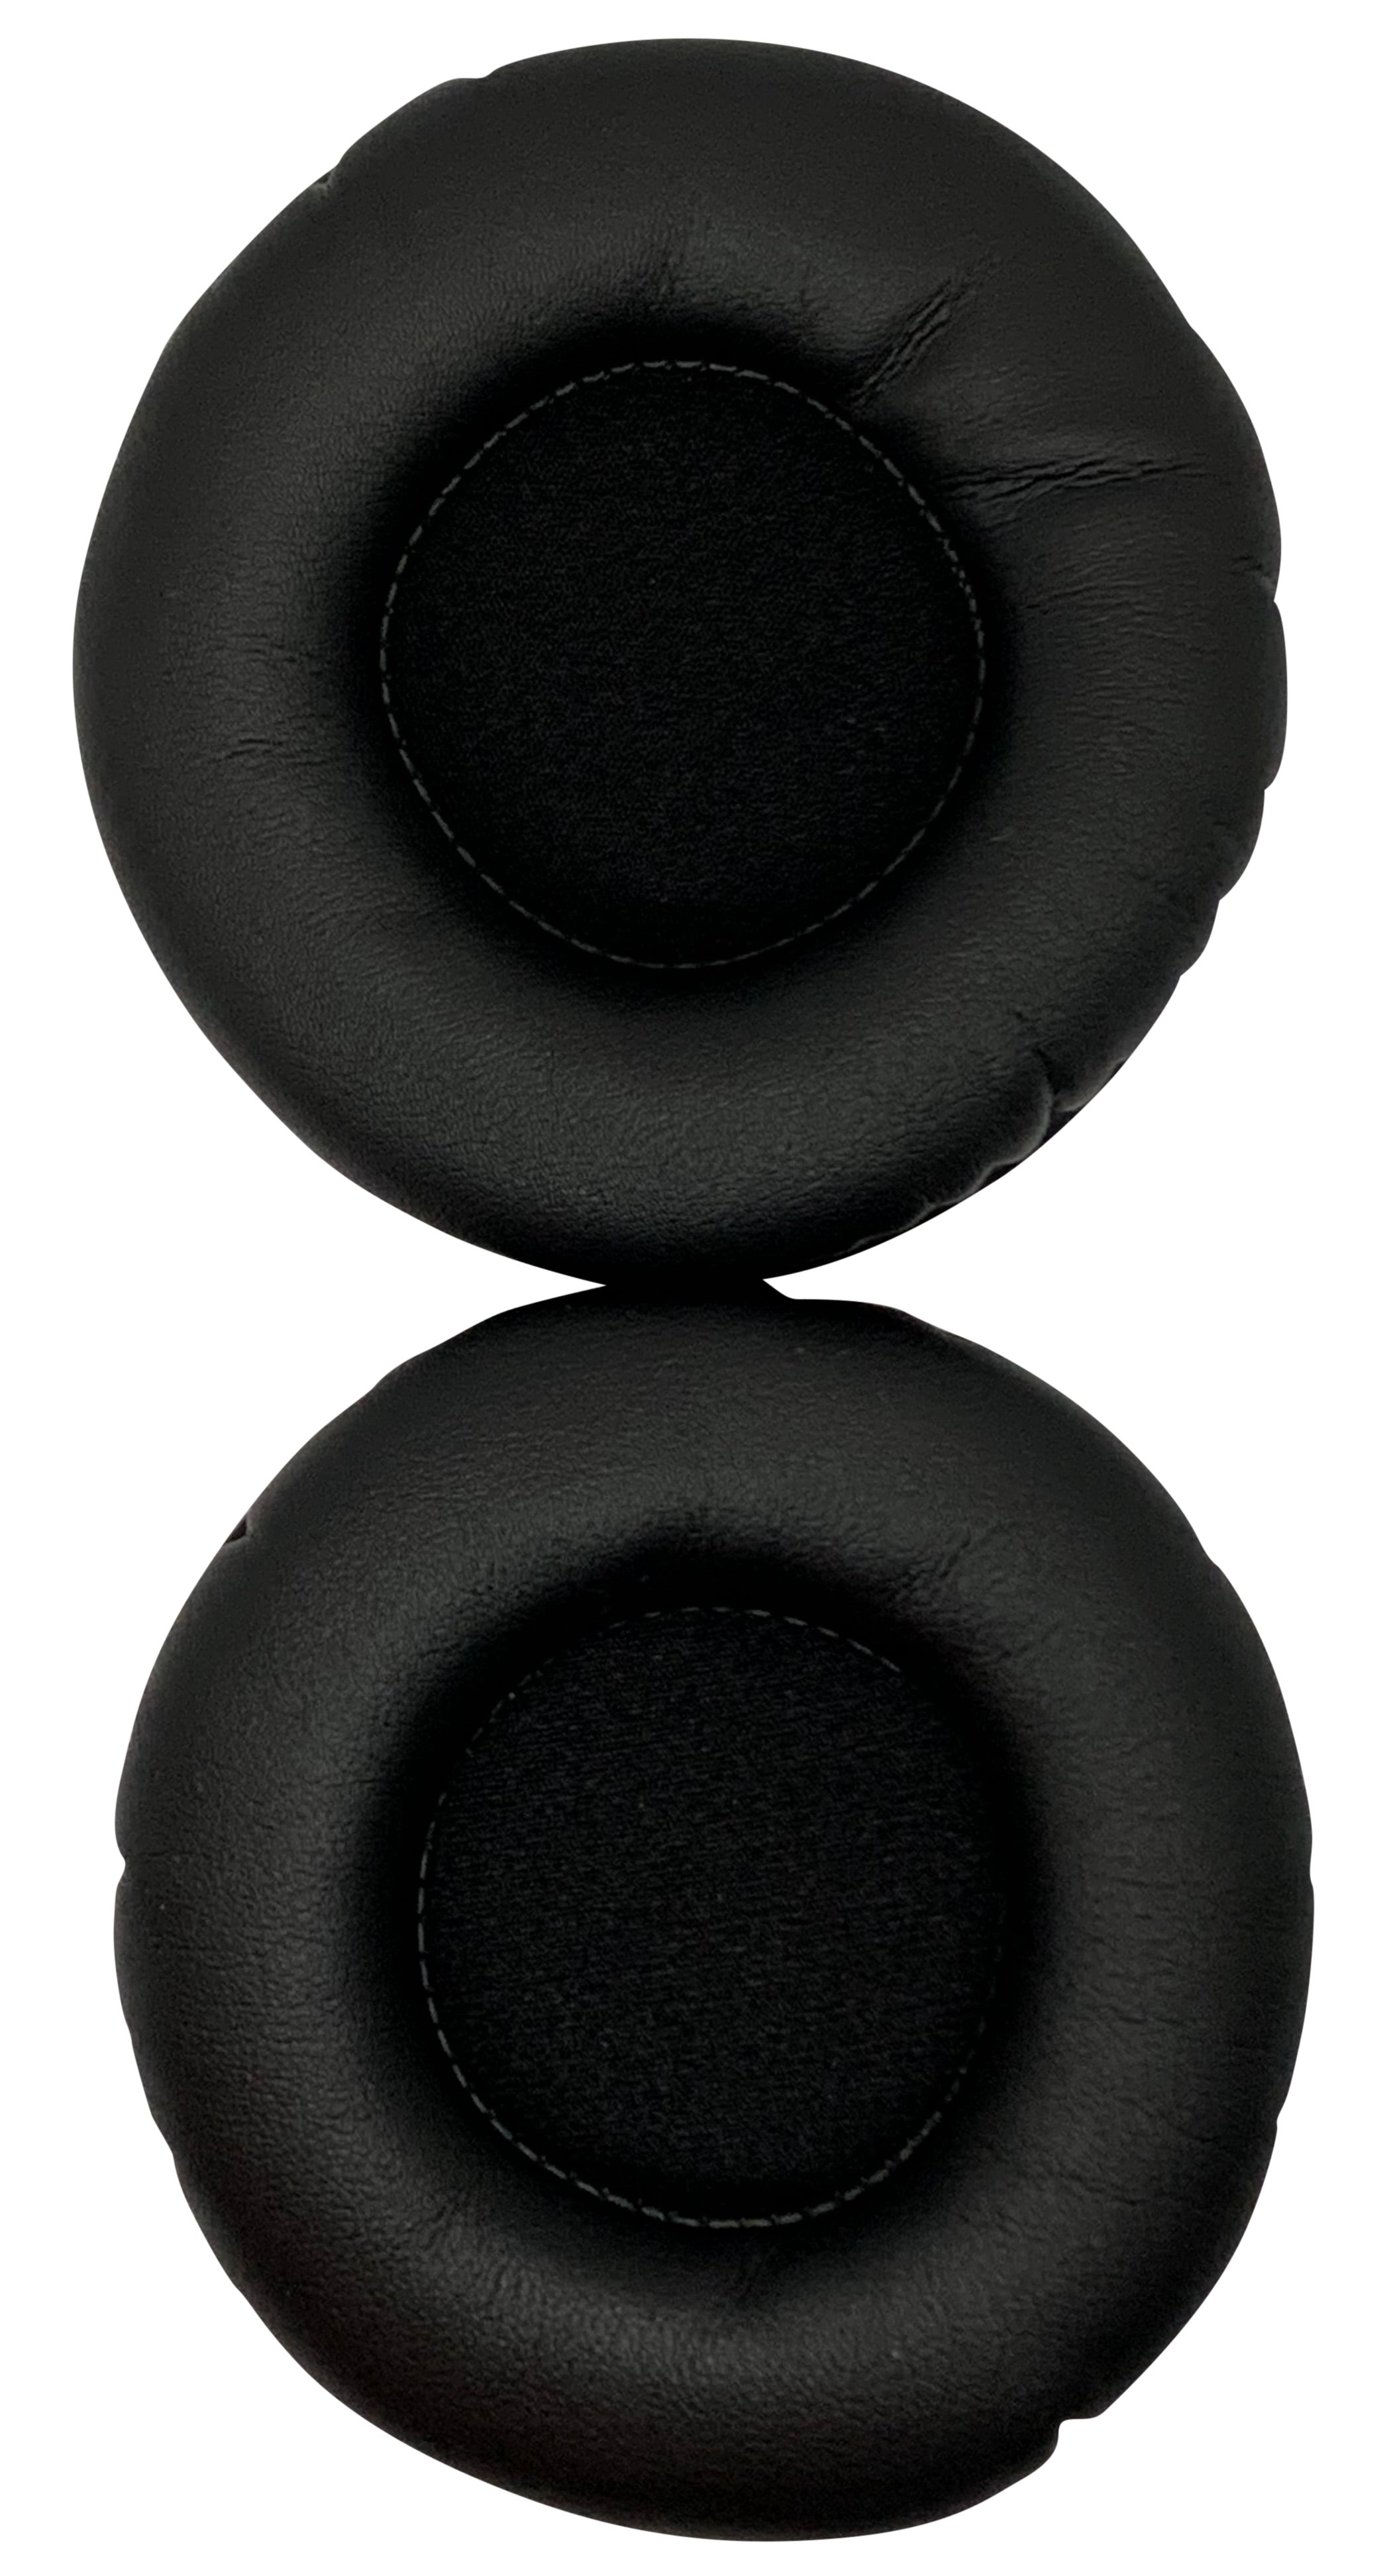 Premium CentralSound Replacement Ear Pad Cushions for Audio-Technica Headphones ATH-WS70 ATH-WS77 ATH-WS99 - CentralSound